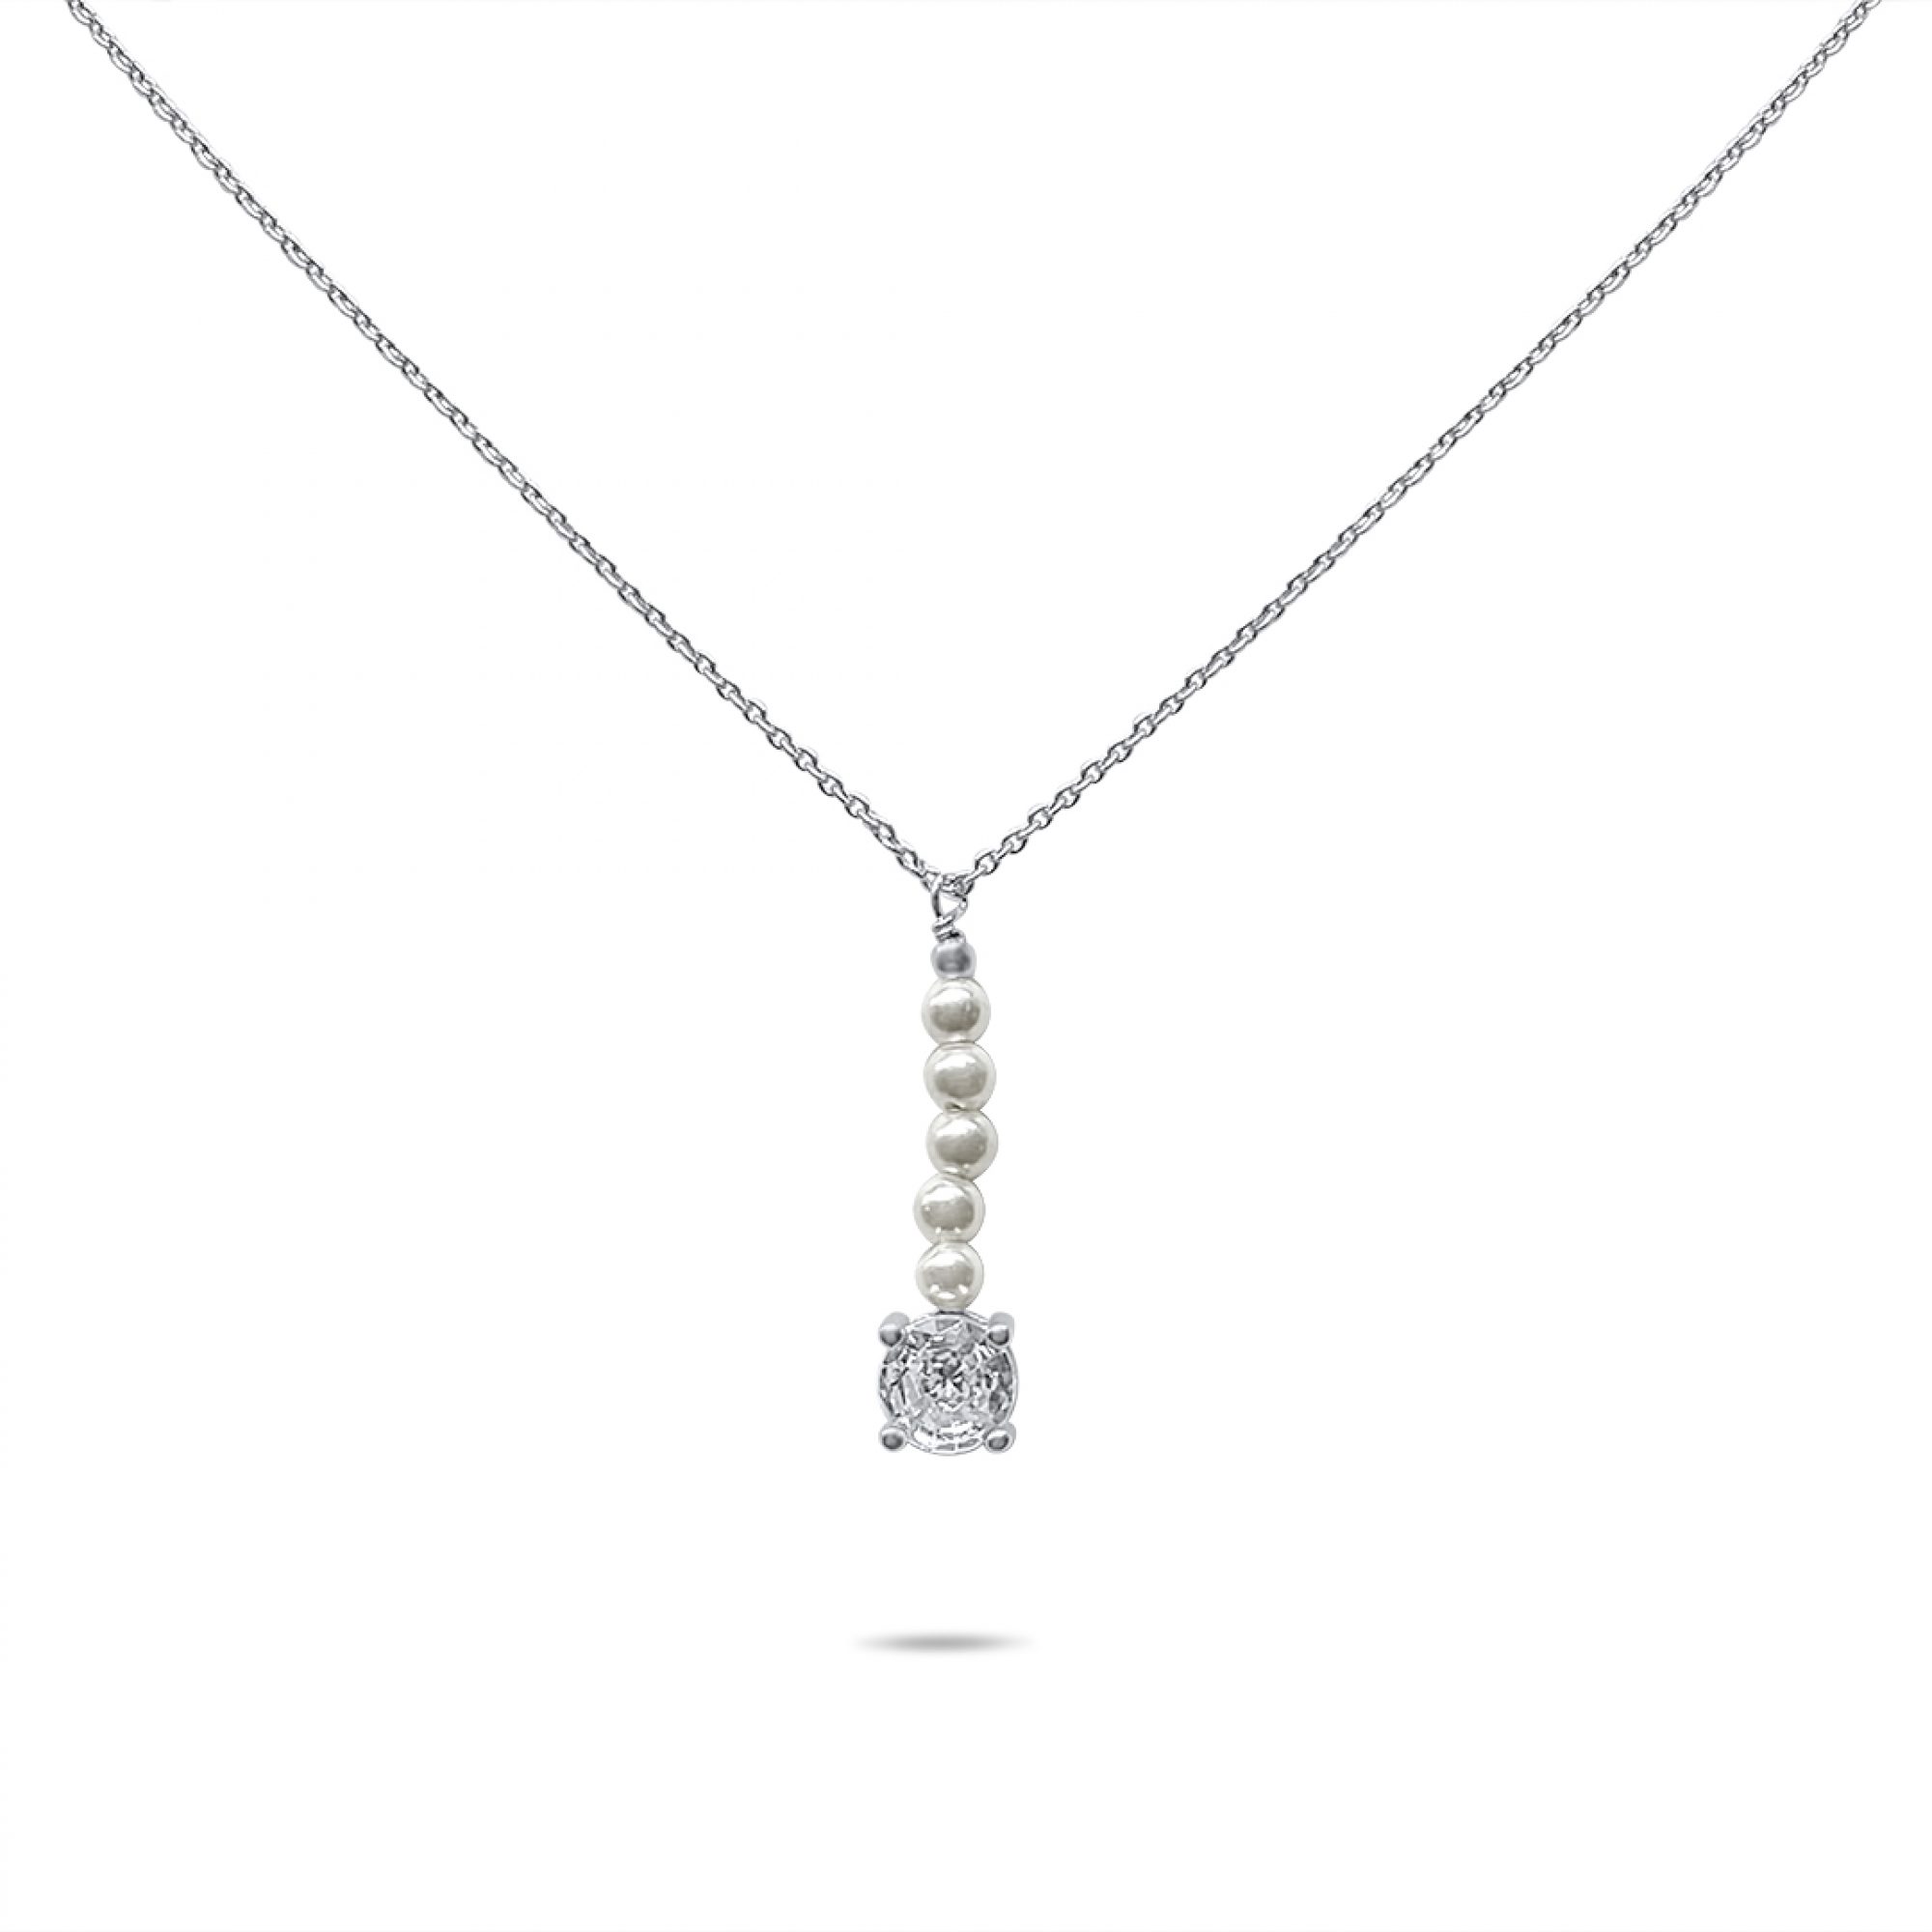 Necklace with zircon stones and pearls